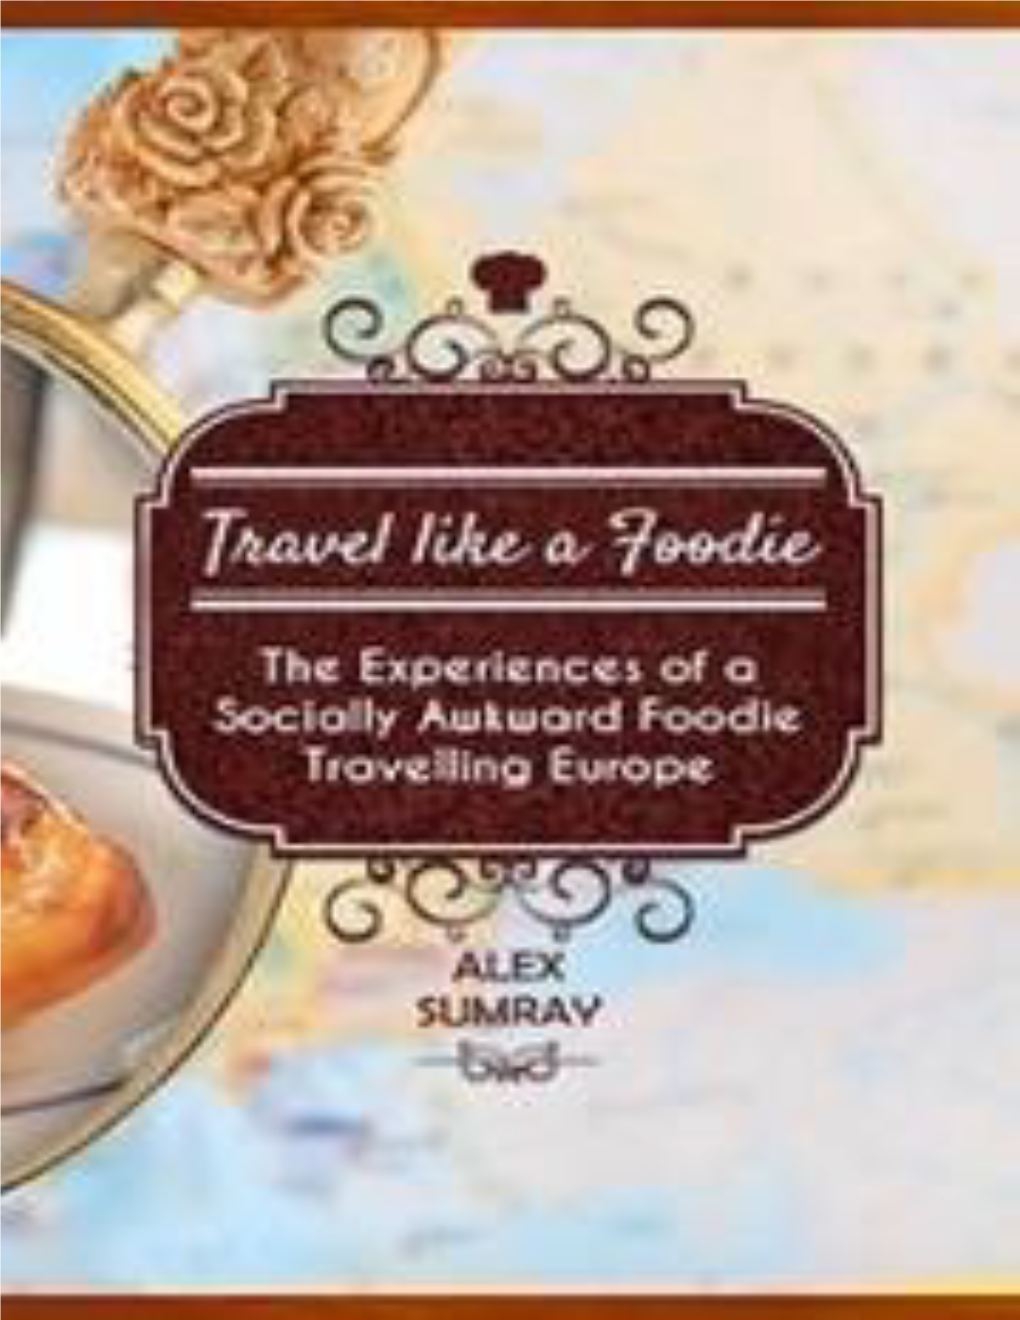 Travel Like a Foodie the Experiences of a Socially Awkward Foodie Travelling Around Europe Alex Sumray ~~~ Smashwords Edition Copyright © 2015 by Alex Sumray